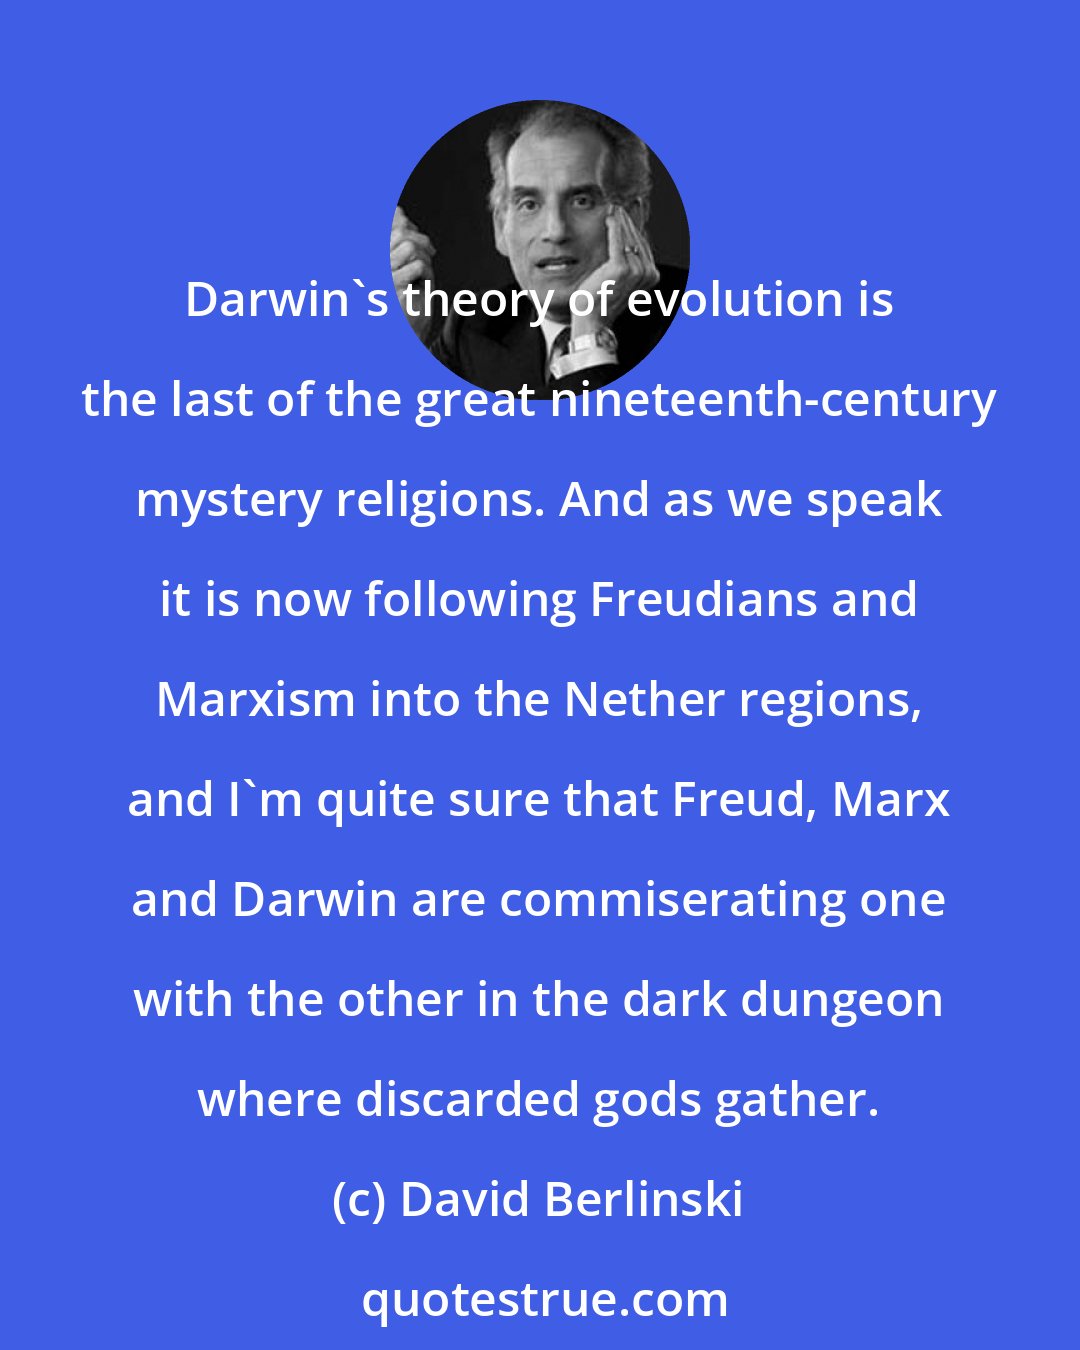 David Berlinski: Darwin's theory of evolution is the last of the great nineteenth-century mystery religions. And as we speak it is now following Freudians and Marxism into the Nether regions, and I'm quite sure that Freud, Marx and Darwin are commiserating one with the other in the dark dungeon where discarded gods gather.